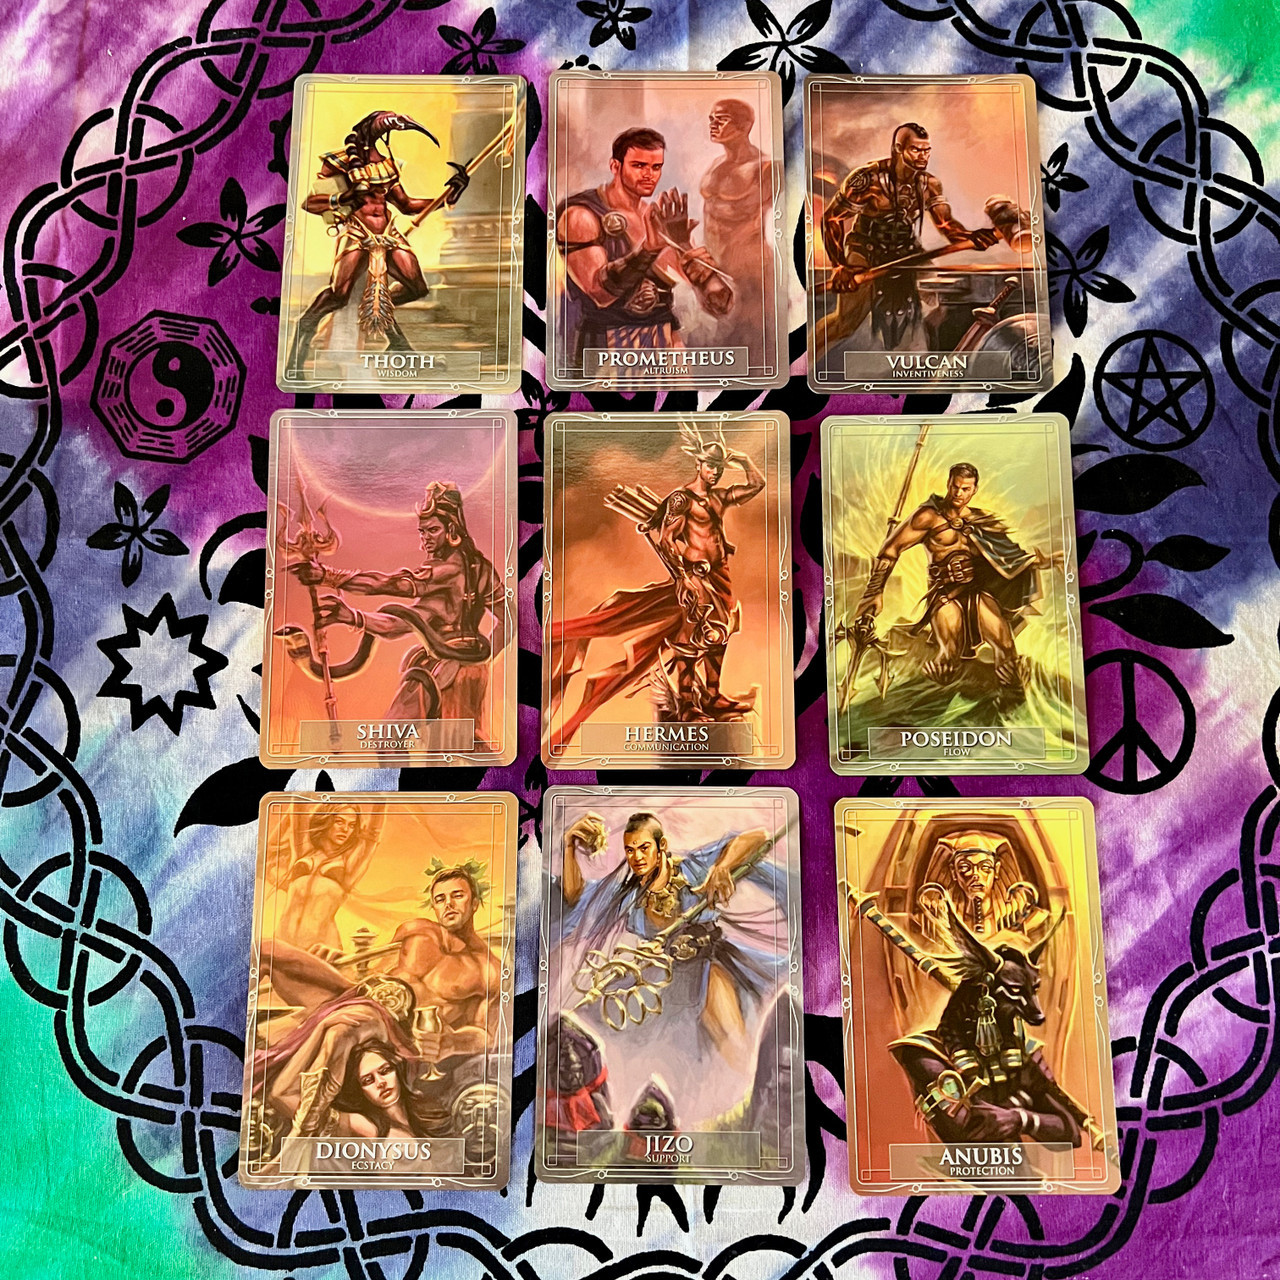 Gods & Titans Oracle Cards